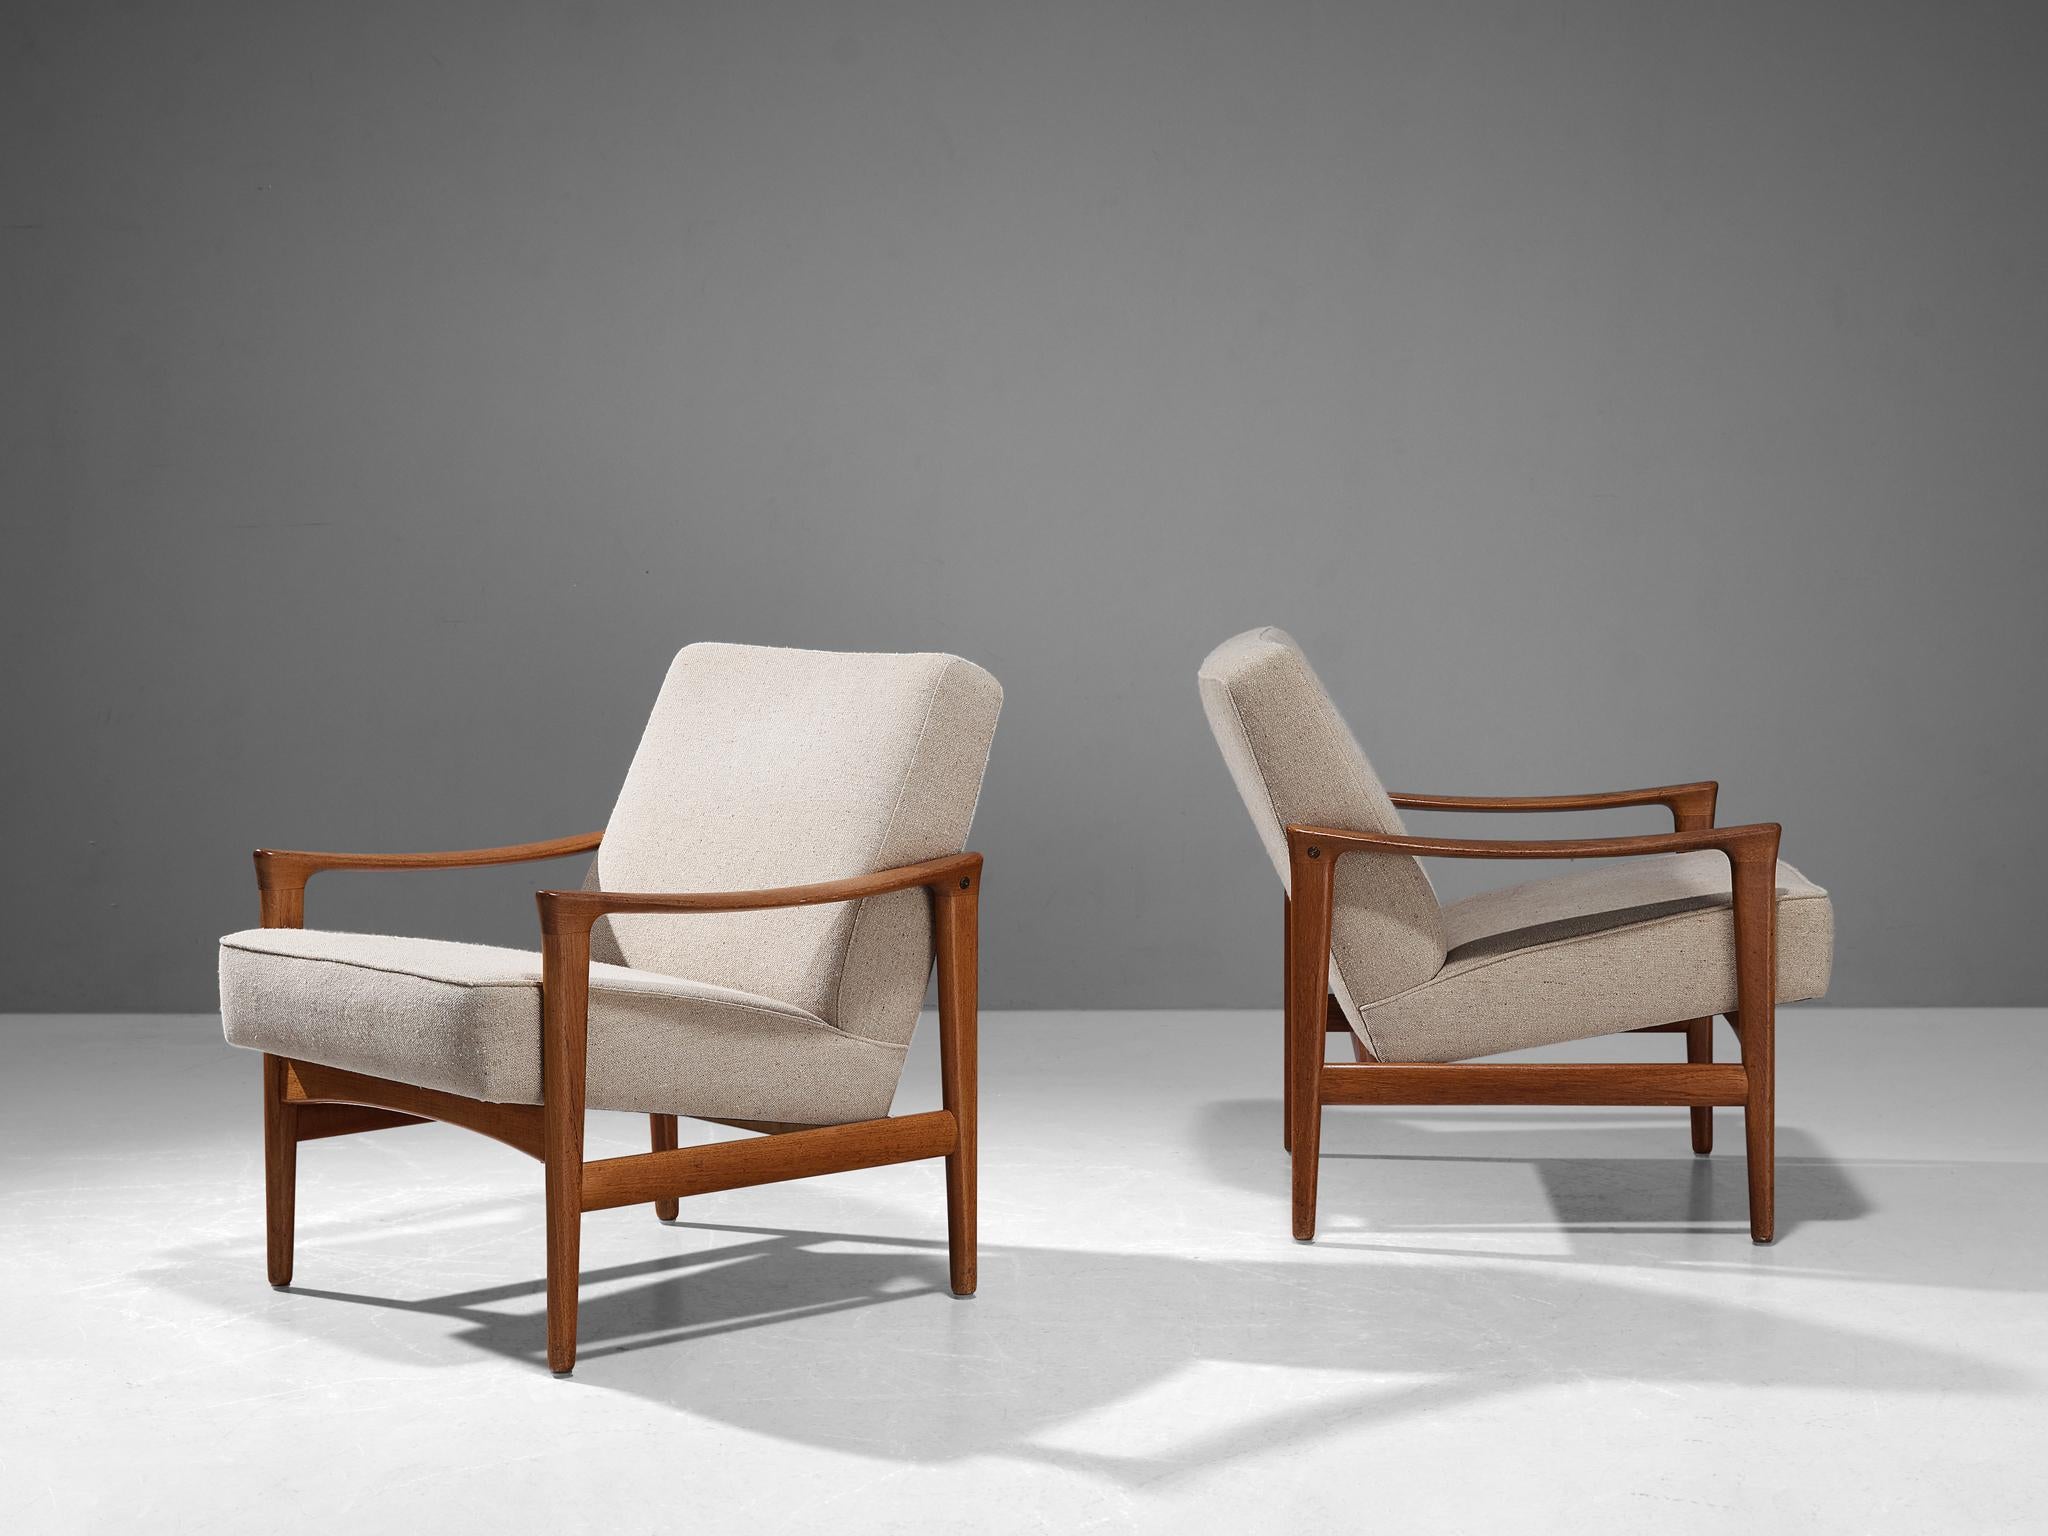 Inge Andersson for Bröderna Andersson, pair of lounge chairs, model 'Oslo', teak, fabric, Sweden, 1960s

These armchairs are a prime example of Scandinavian Mid-Century design ideology. Clear in its appearance, use of neutral materials, and refined